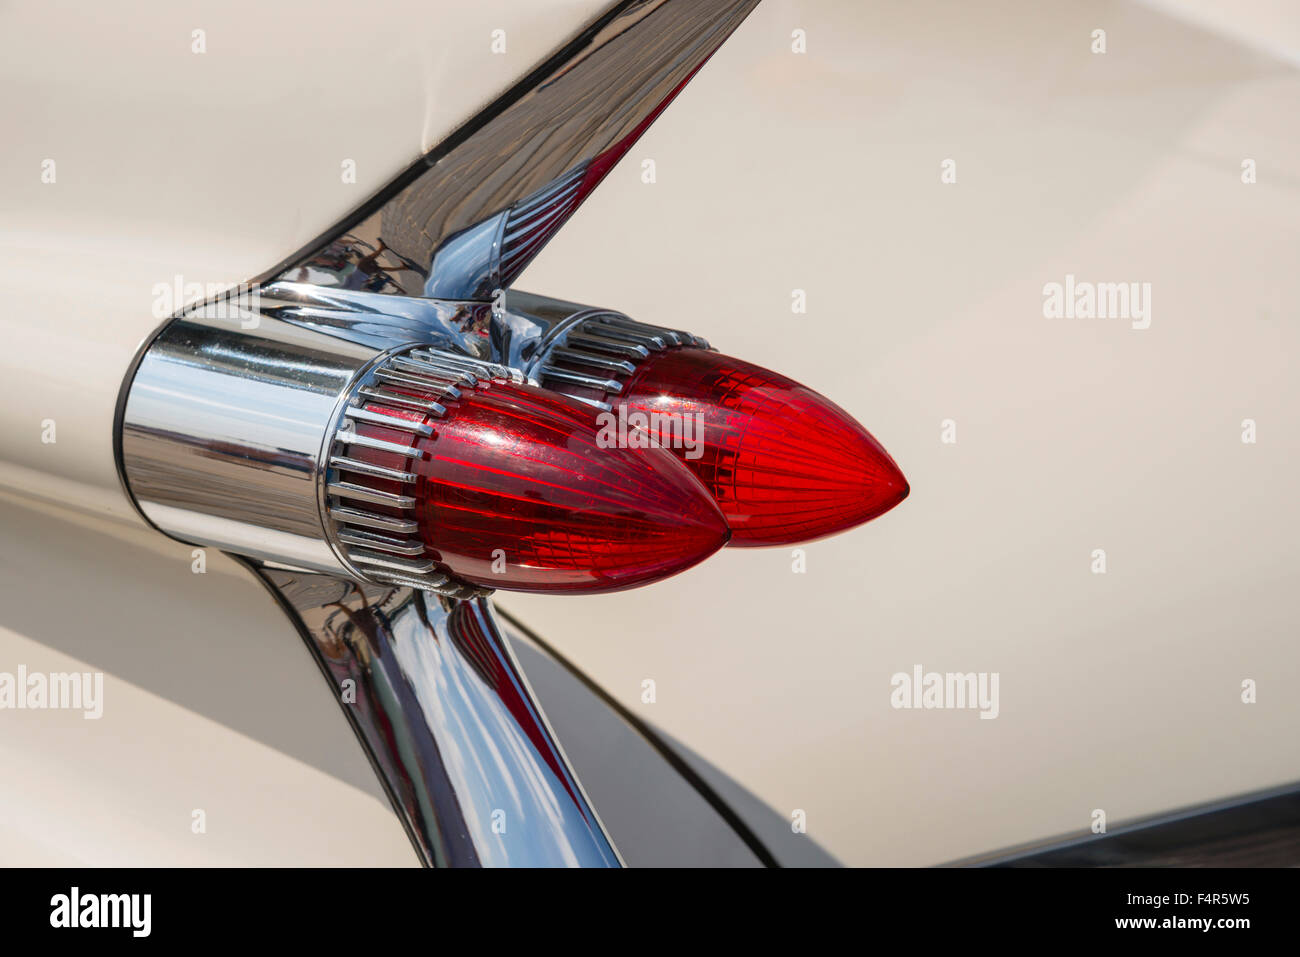 In 1959, construction year, convertible, Cadillac, Convertible, fin, vintage, back lights, car, automobile, Stock Photo